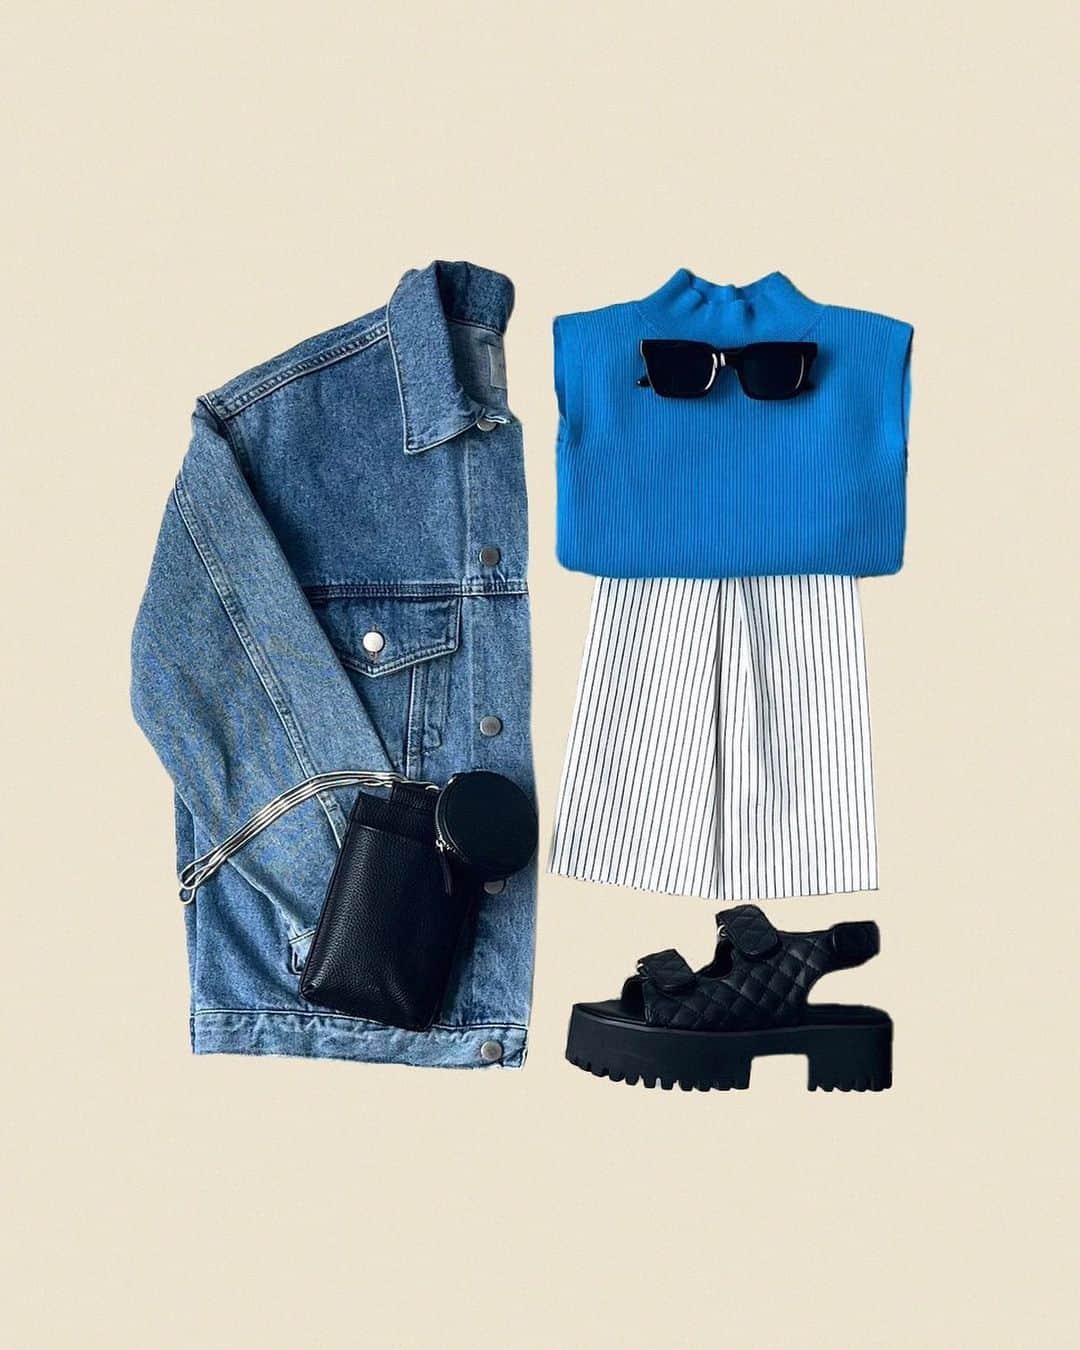 AMAILのインスタグラム：「#outfit  ✔︎ Standard sunglasses ✔︎ Box denim Jacket ✔︎ Fashionable cut out tops ✔︎ Marin mini skirt ✔︎ Candy pomp bag ✔︎ ︎Tank sole up sandal  #AMAIL #アマイル #ワントーンコーデ」